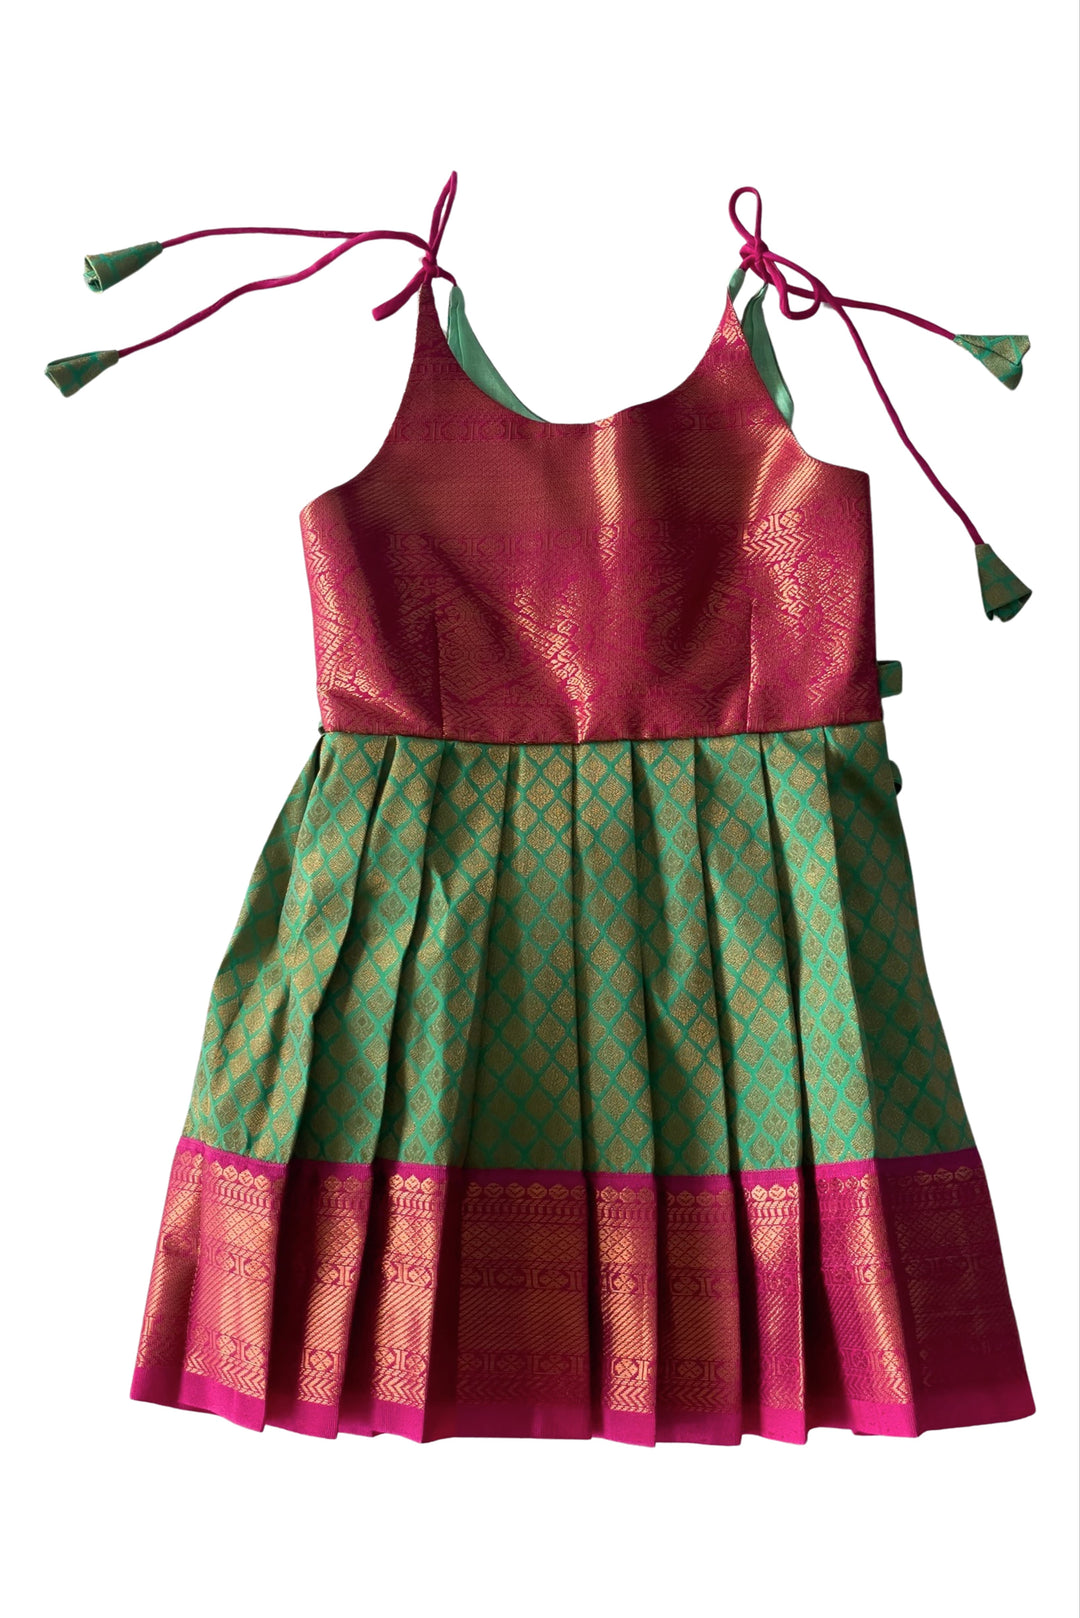 The Nesavu Tie-up Frock Chic Magenta and Green Tie-Up Silk Frock for Girls - Traditional Elegance Nesavu 14 (6M) / Green / Style 4 T304D-14 Girls Magenta & Green Silk Frock | Festive Tie-Up Design | Classic Cultural Attire | The Nesavu